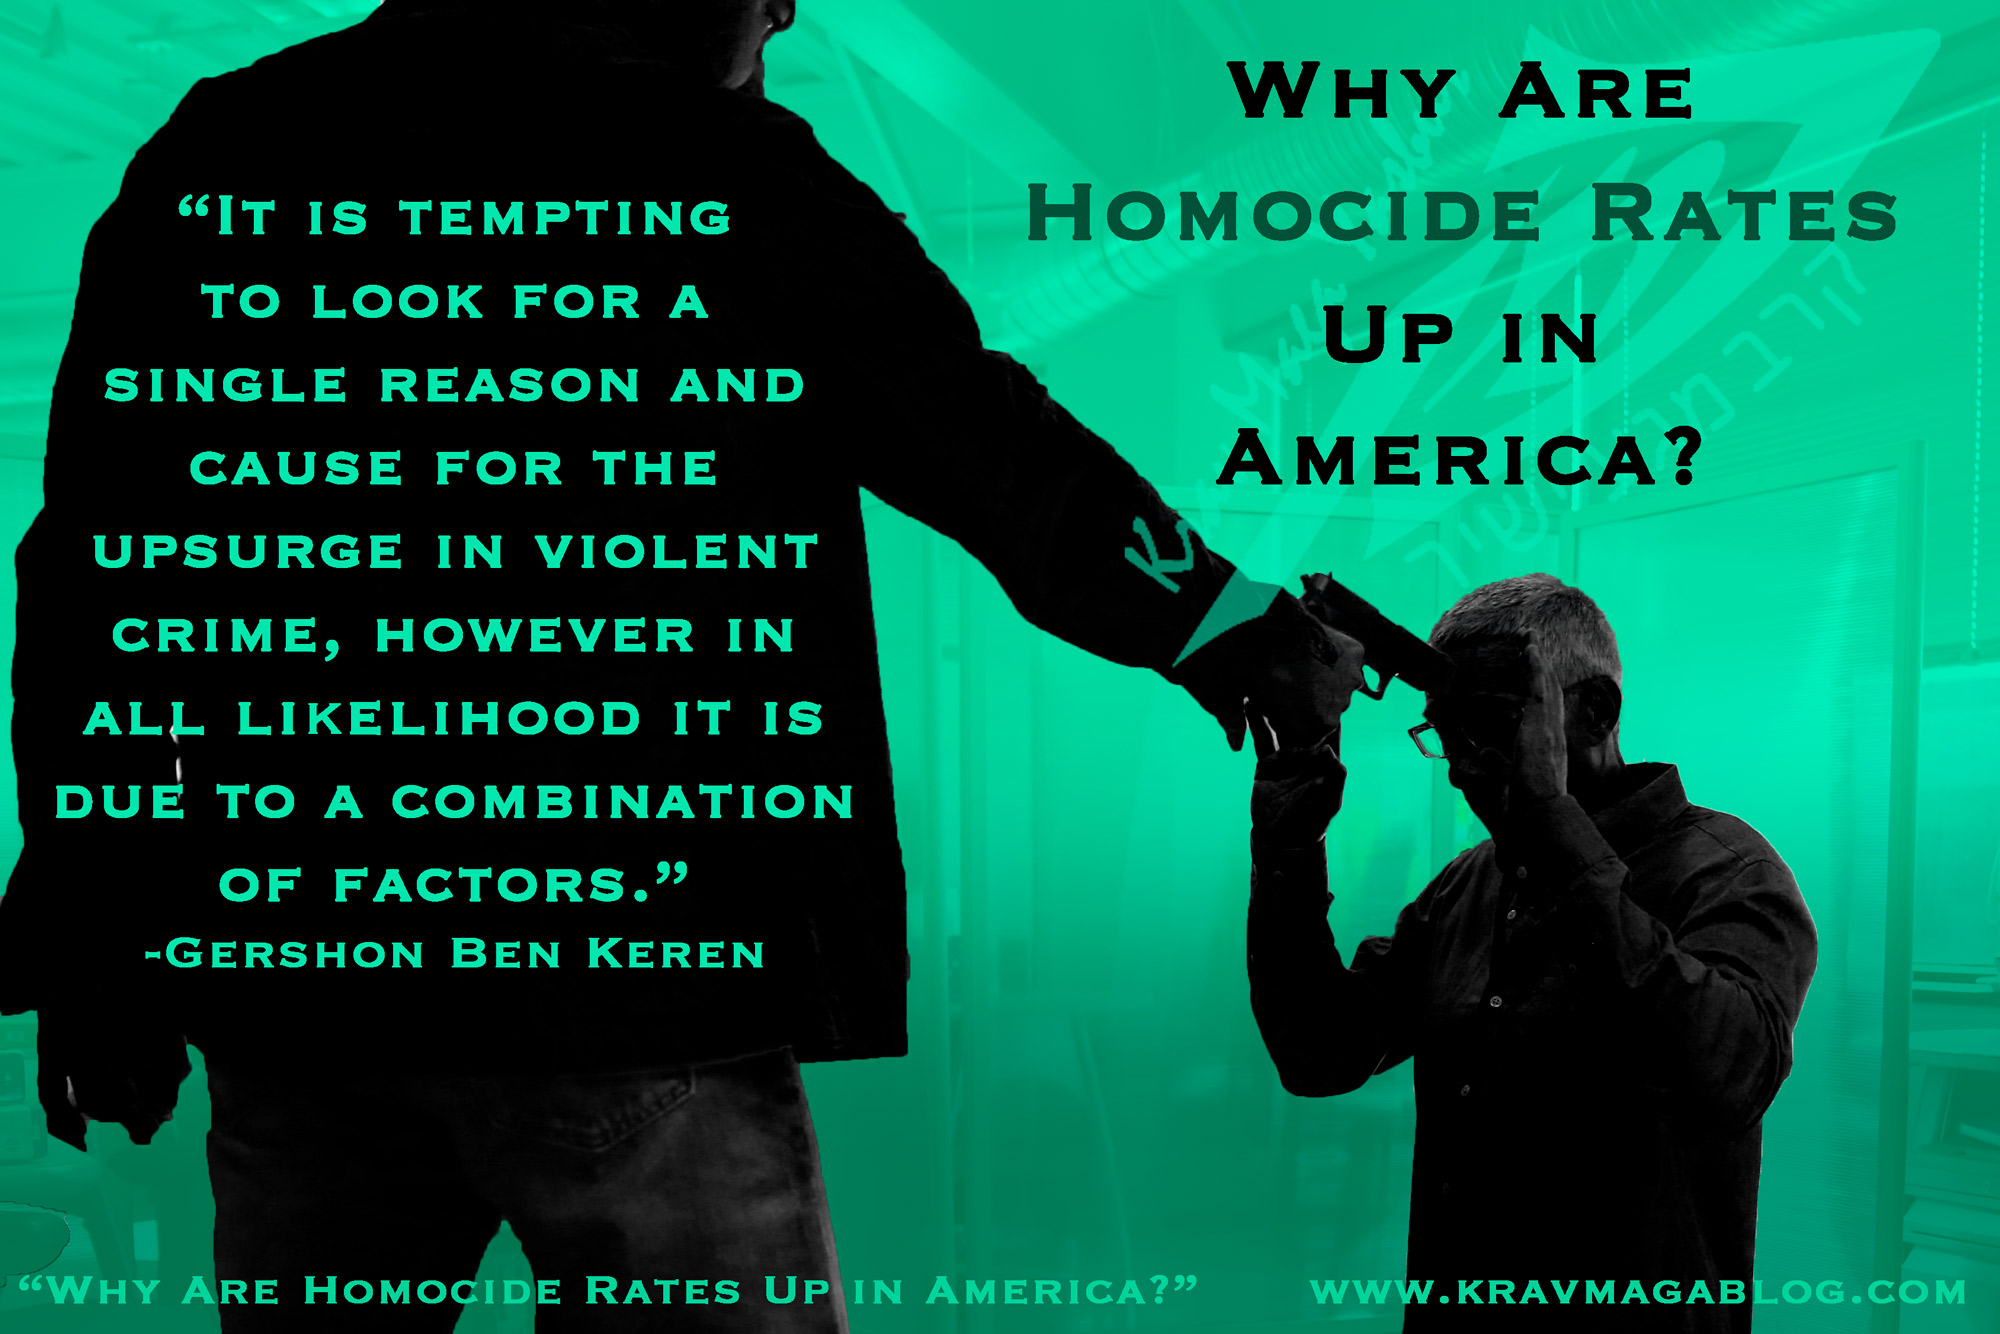 Blog About Why Are Homicide Rates Up In America?